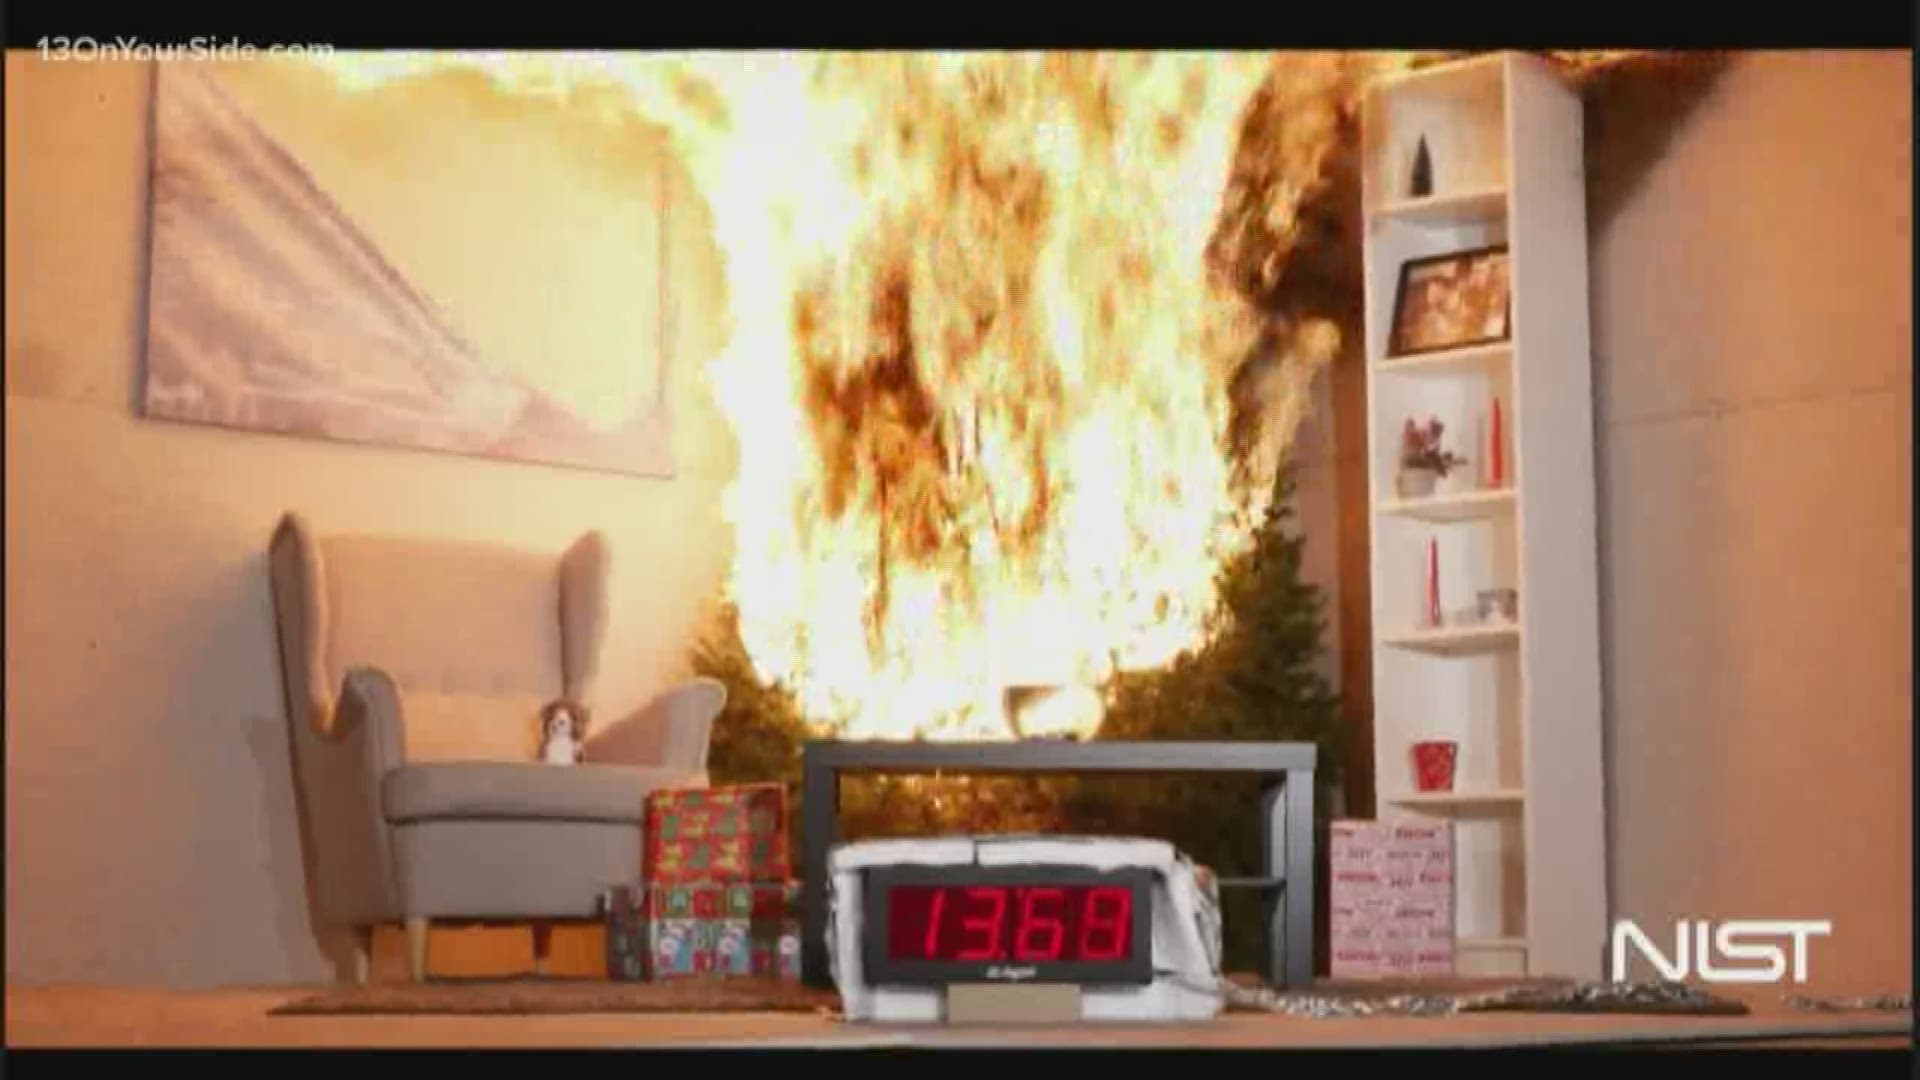 It's often a forgotten danger, but Christmas tree fires happen in roughly 200 homes every year.